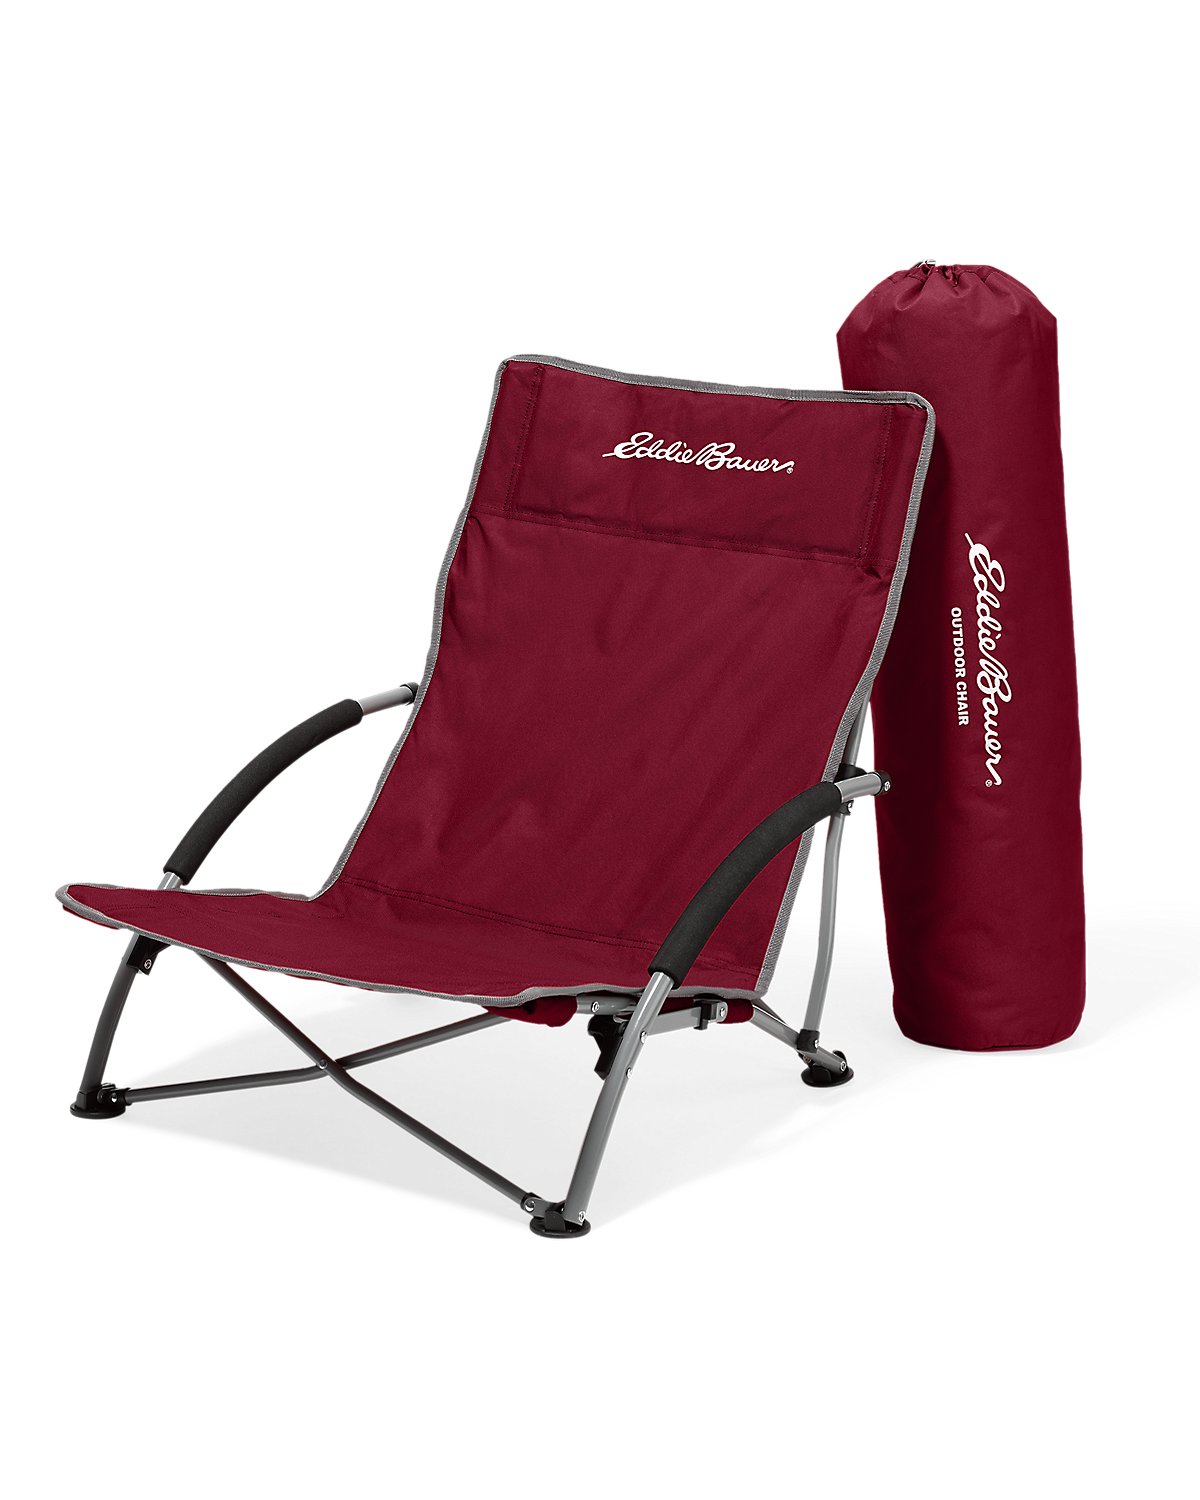 Eddie Bauer Camp Chair Low only 20.00